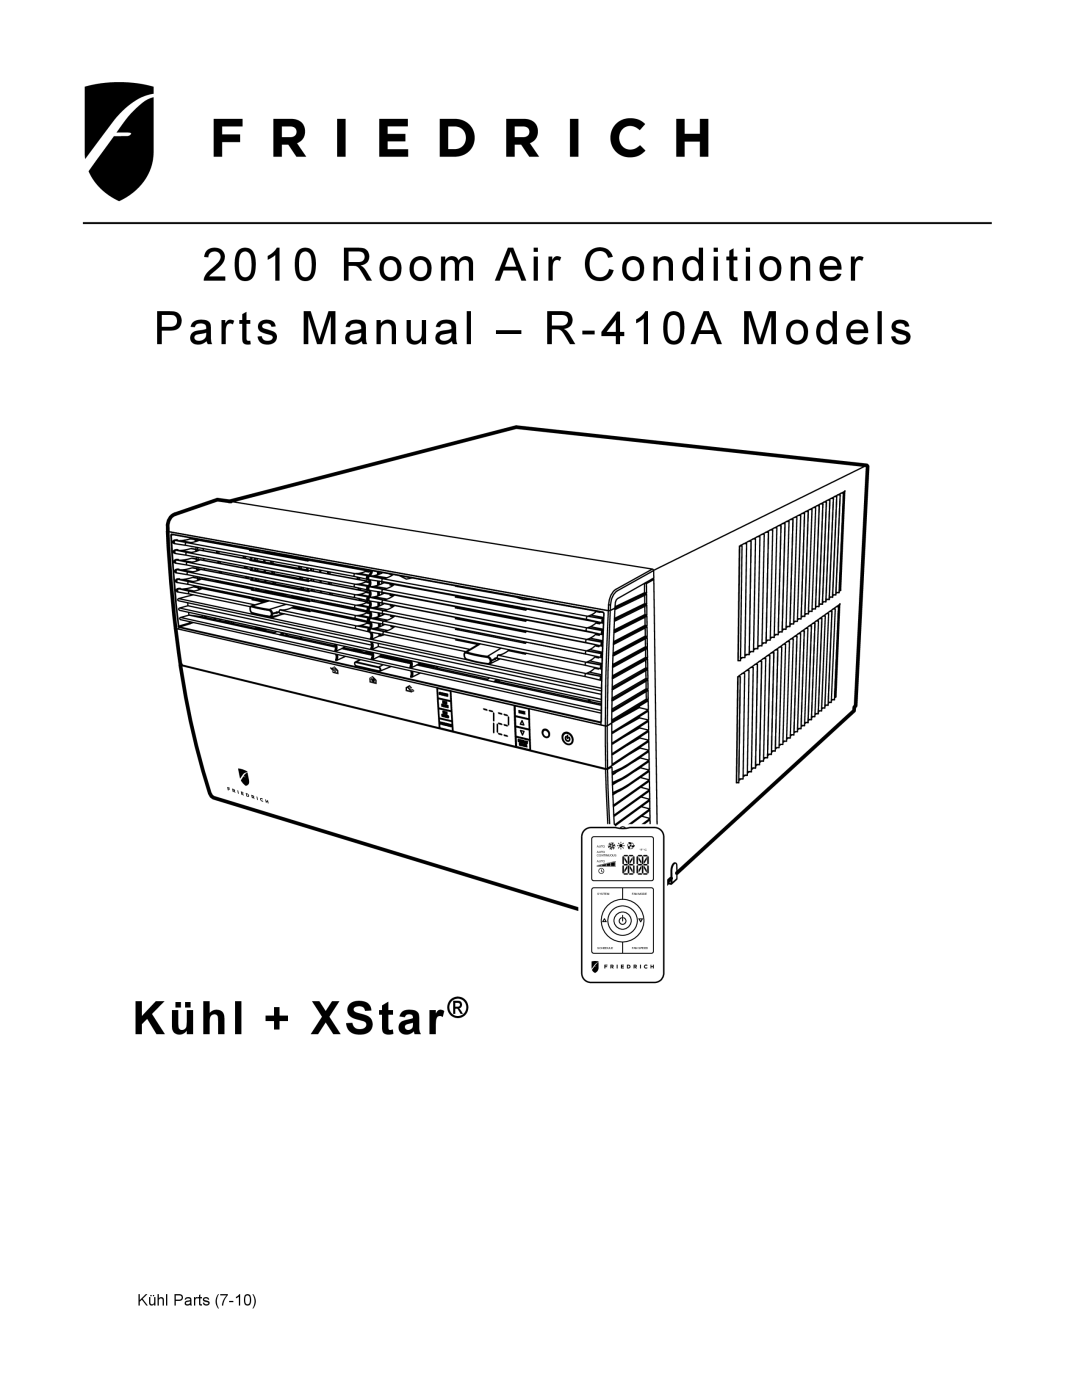 Friedrich service manual R-410AModels, Cool Only, Hazardous Duty Room Air Conditioner 